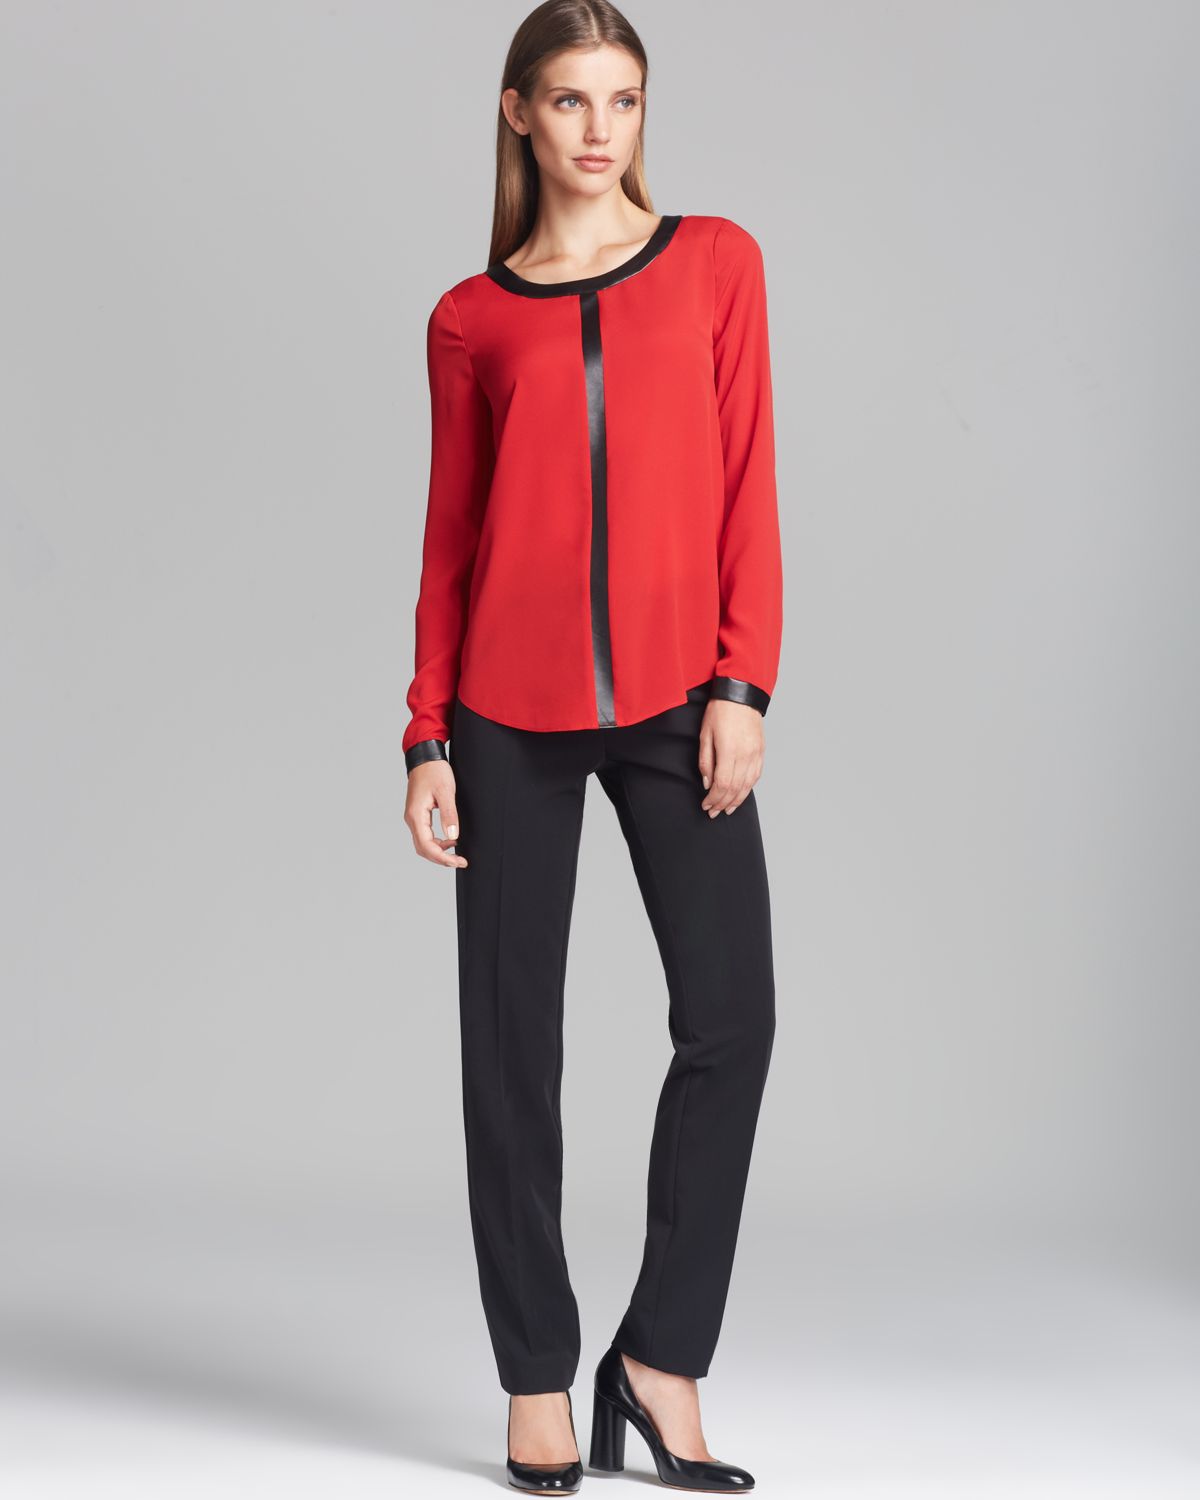 Dkny Blouse with Faux Leather Trim in Red | Lyst